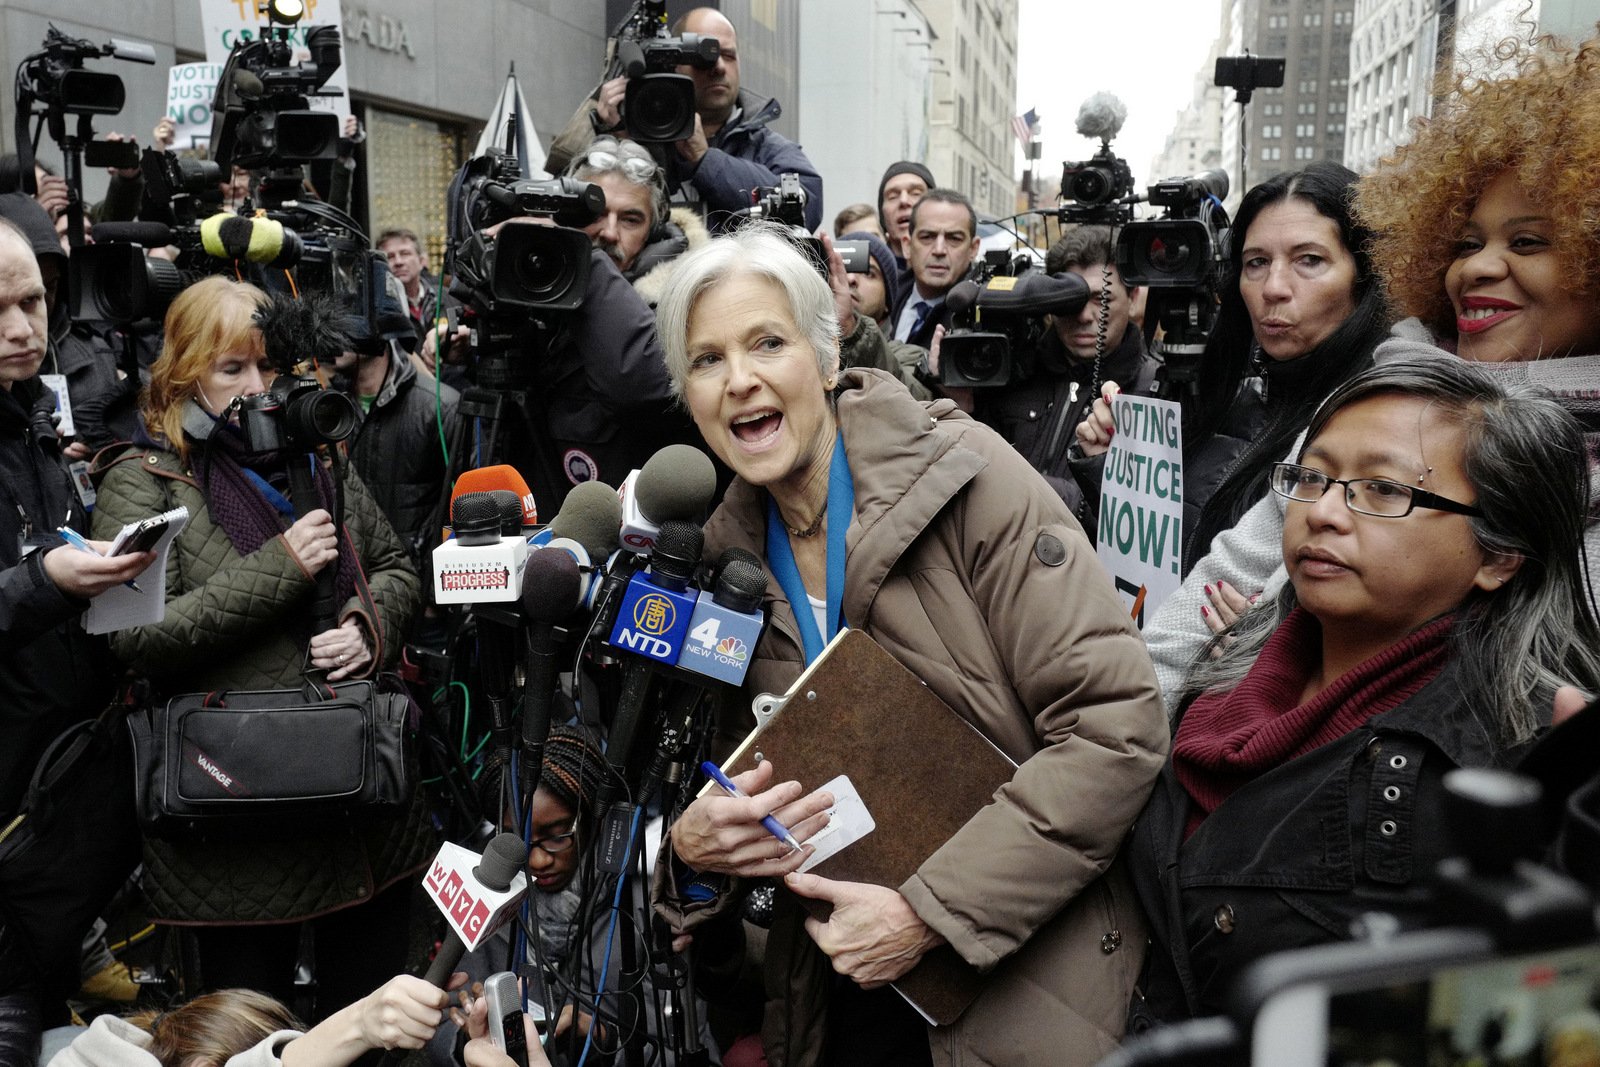 Jill Stein, the presidential Green Party candidate, speaks at a news conference in front of Trump Tower, Monday, Dec. 5, 2016, in New York. Stein is spearheading recount efforts in Pennsylvania, Michigan and Wisconsin. (AP Photo/Mark Lennihan)